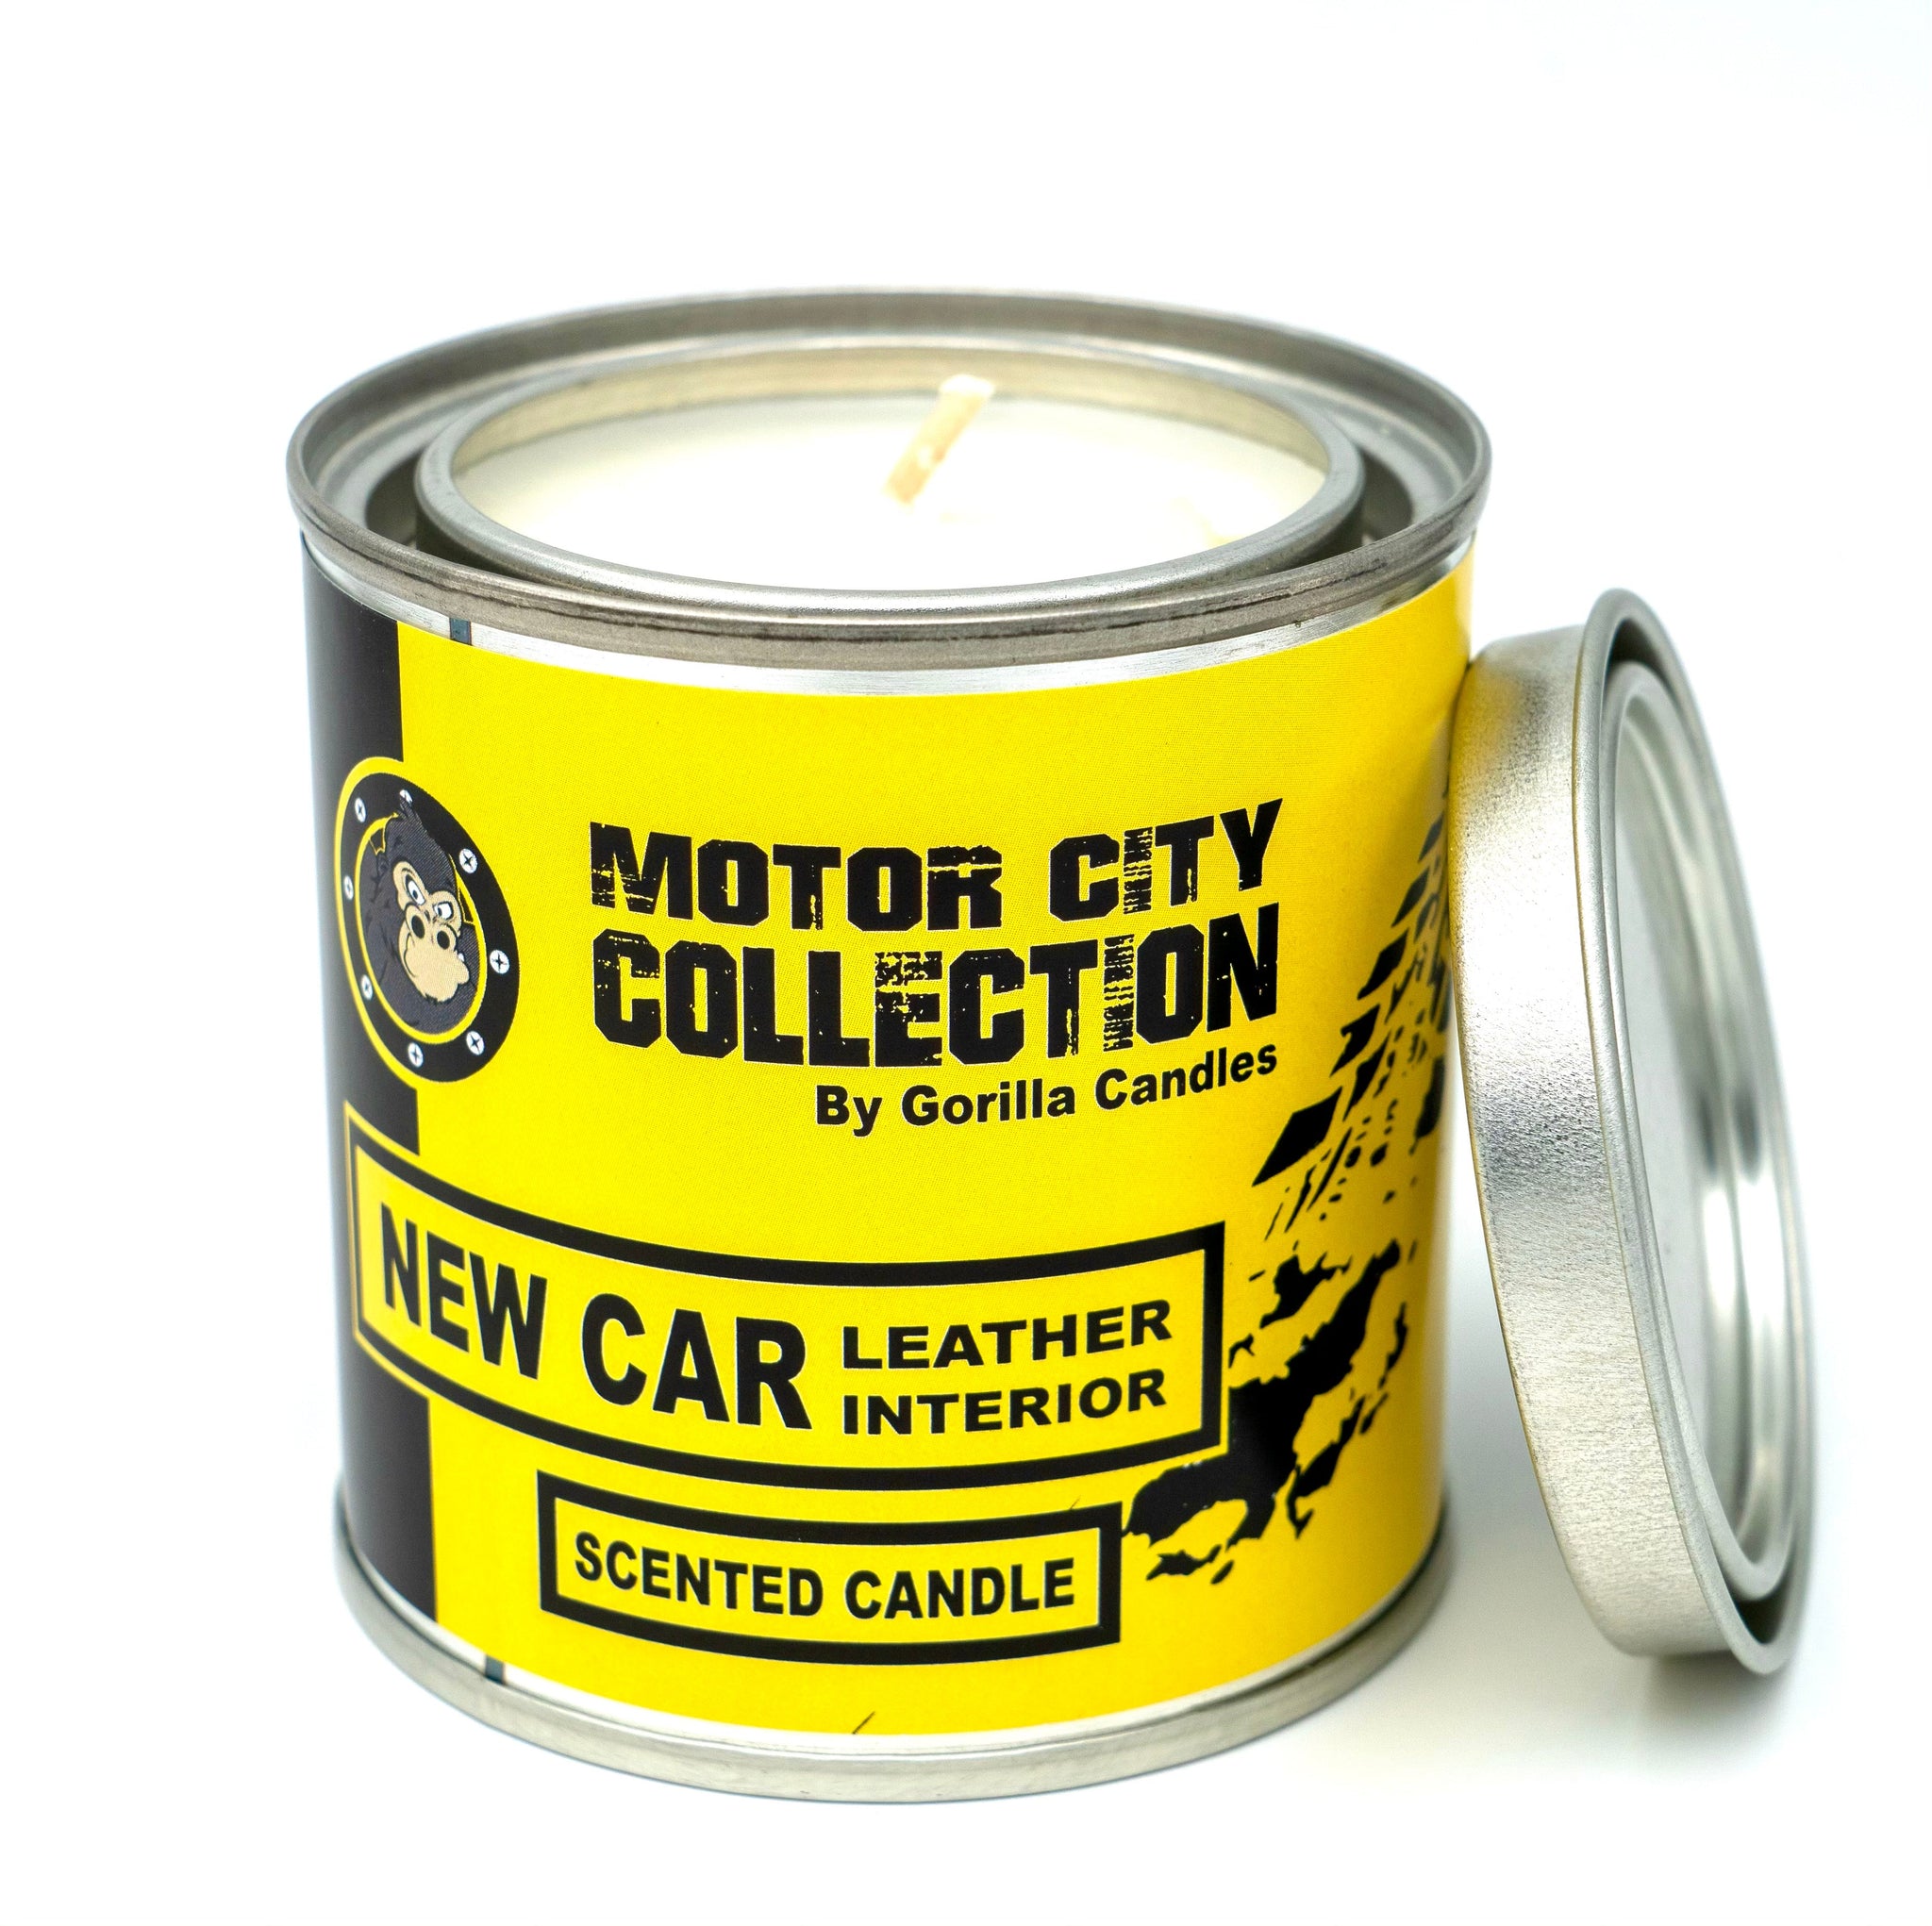 New Car Leather Interior by Gorilla Candles™